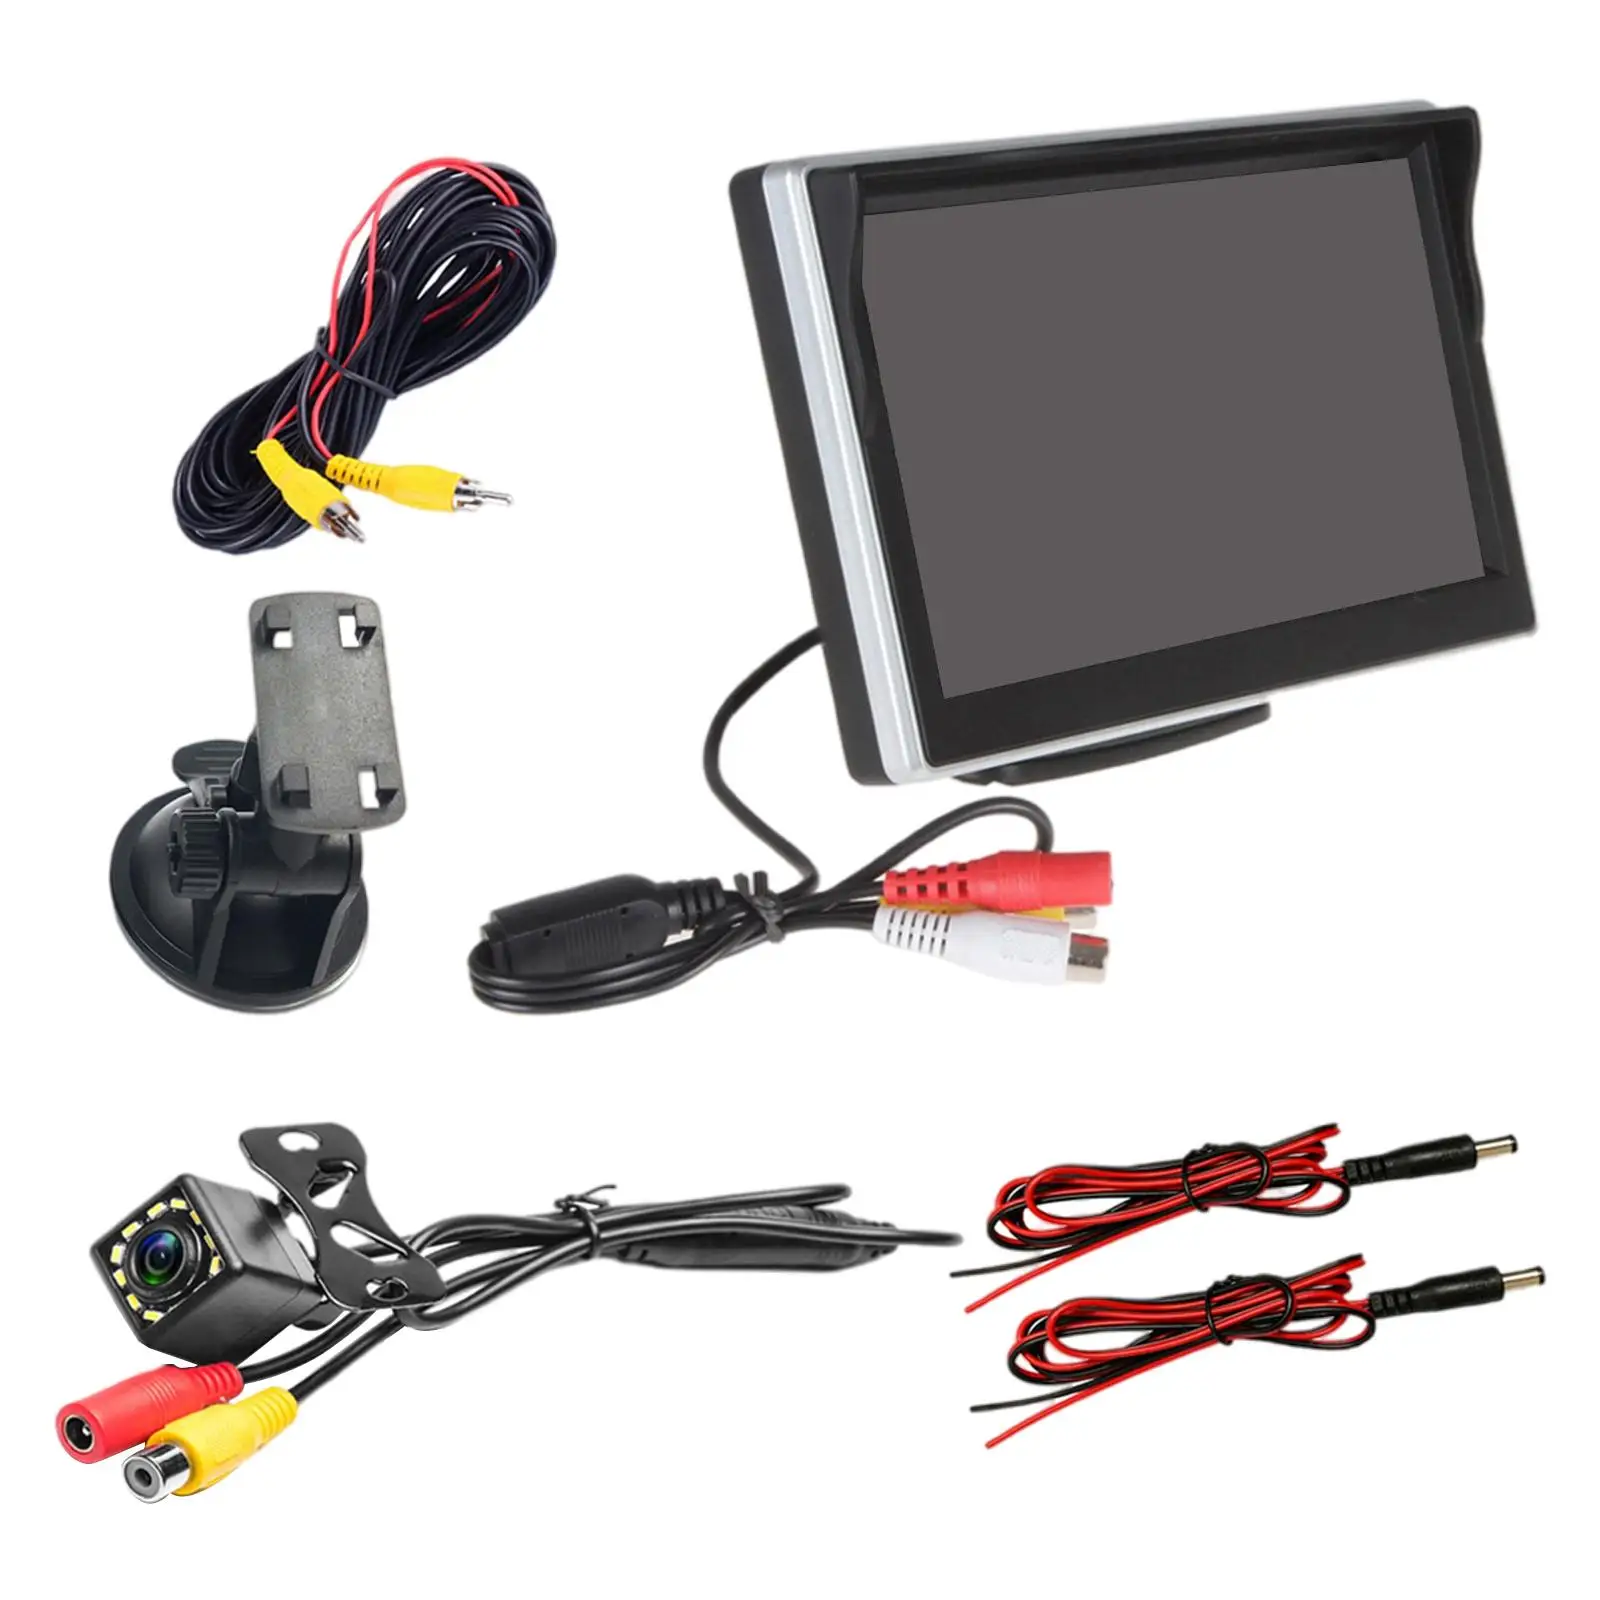 5-Inch 12 LED Car Monitor Camera Rear View Camera System for Truck Car